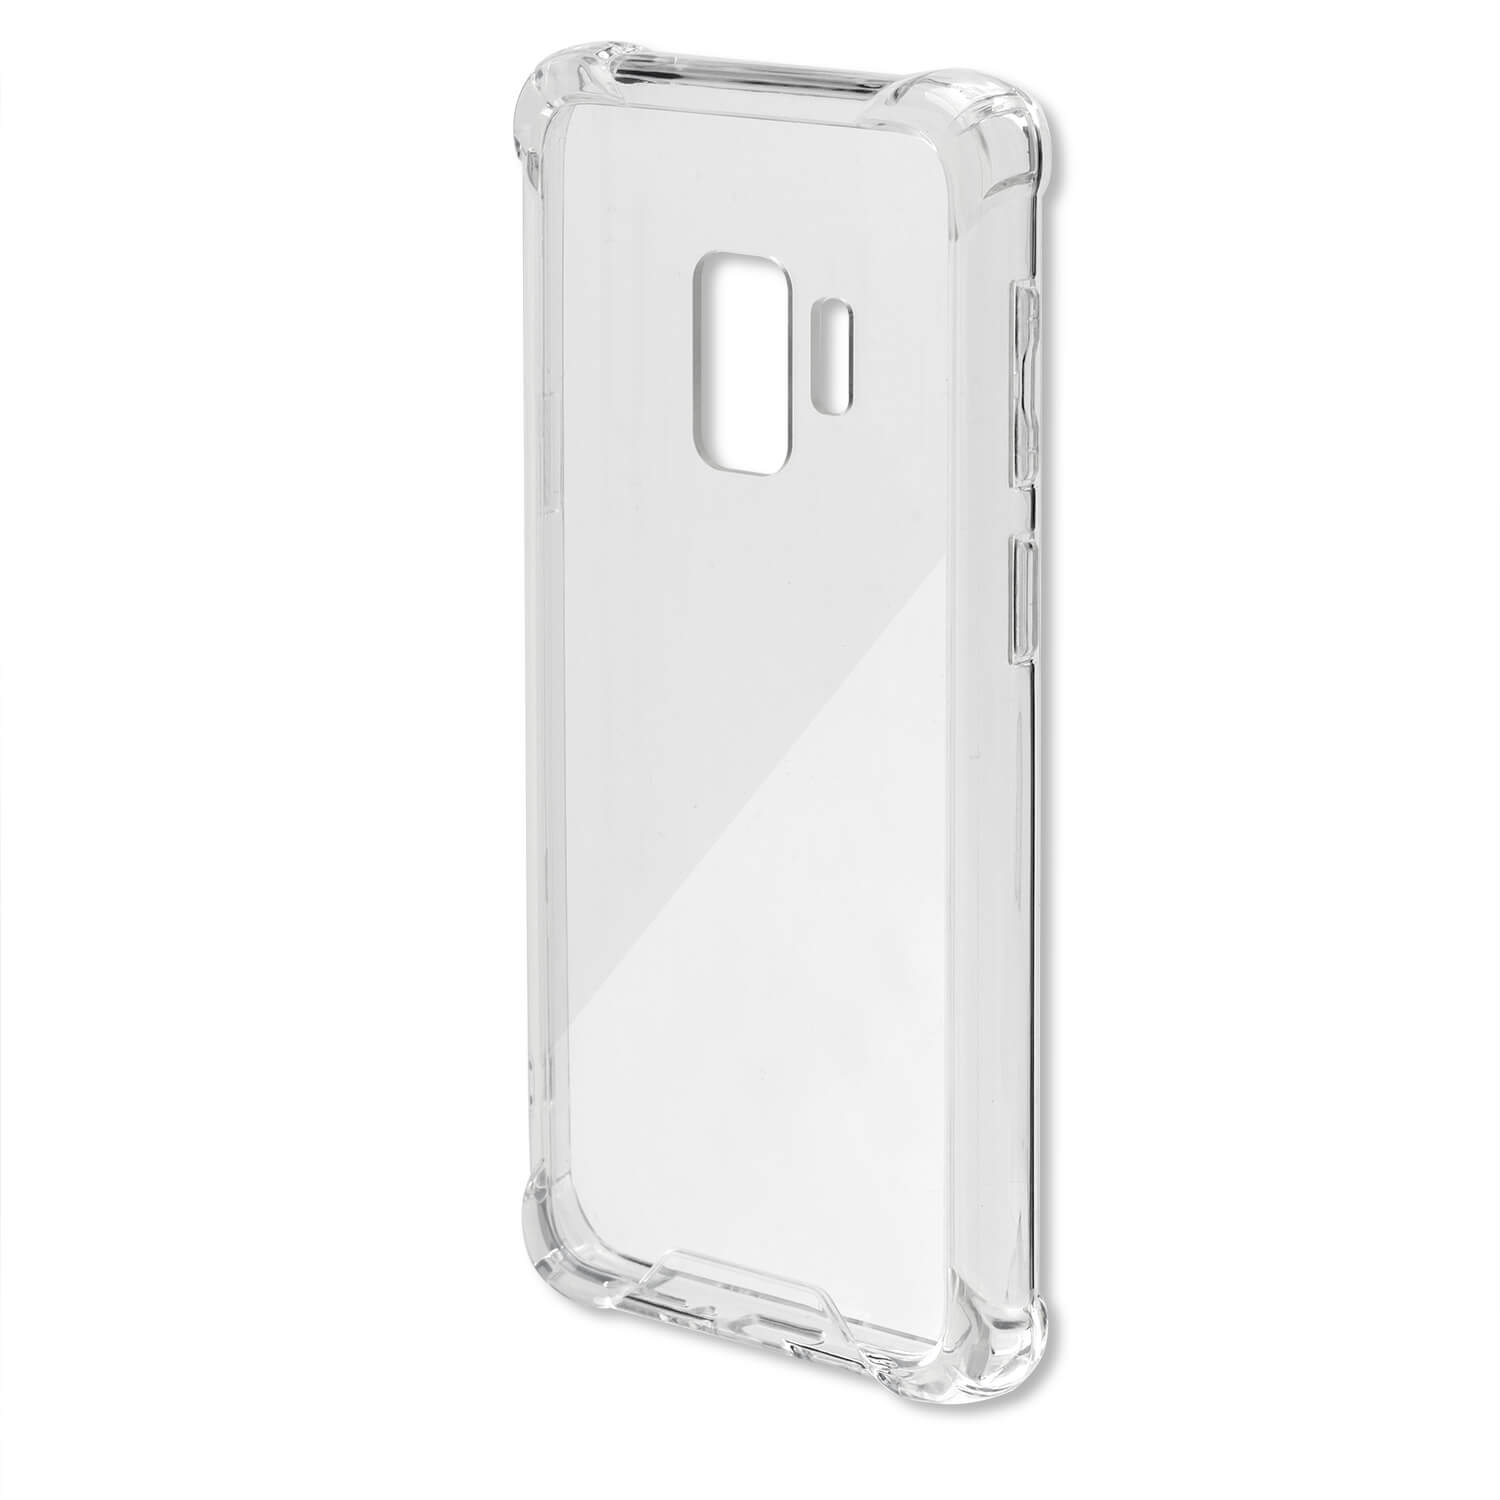 samsung s9 clear cover